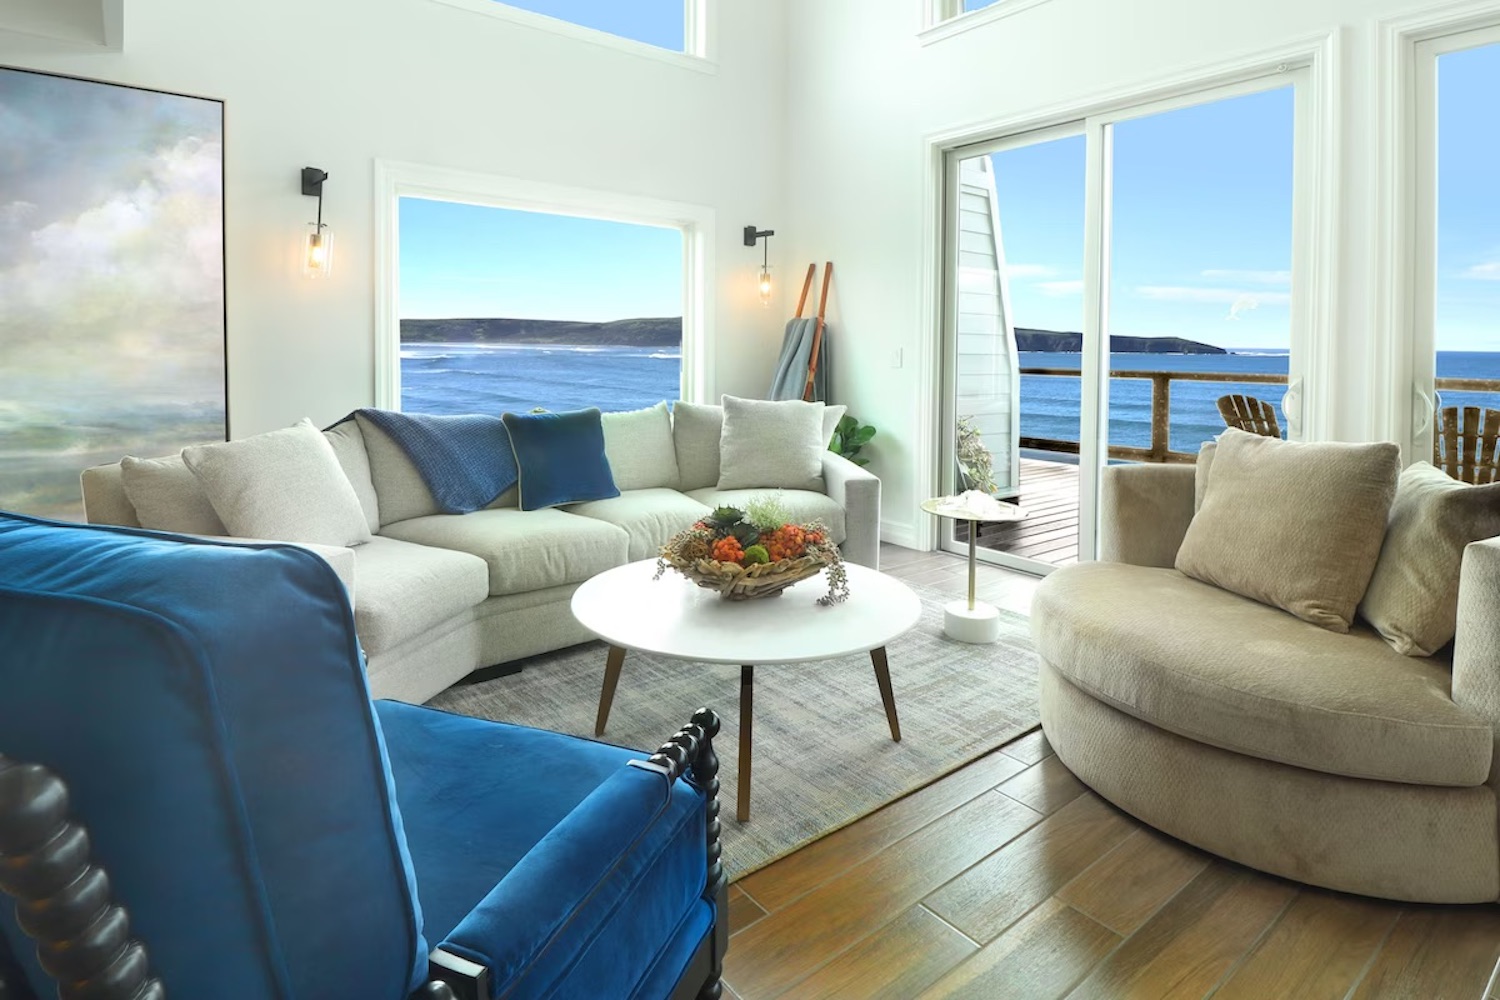 White and blue living room overlooking Pacific Ocean